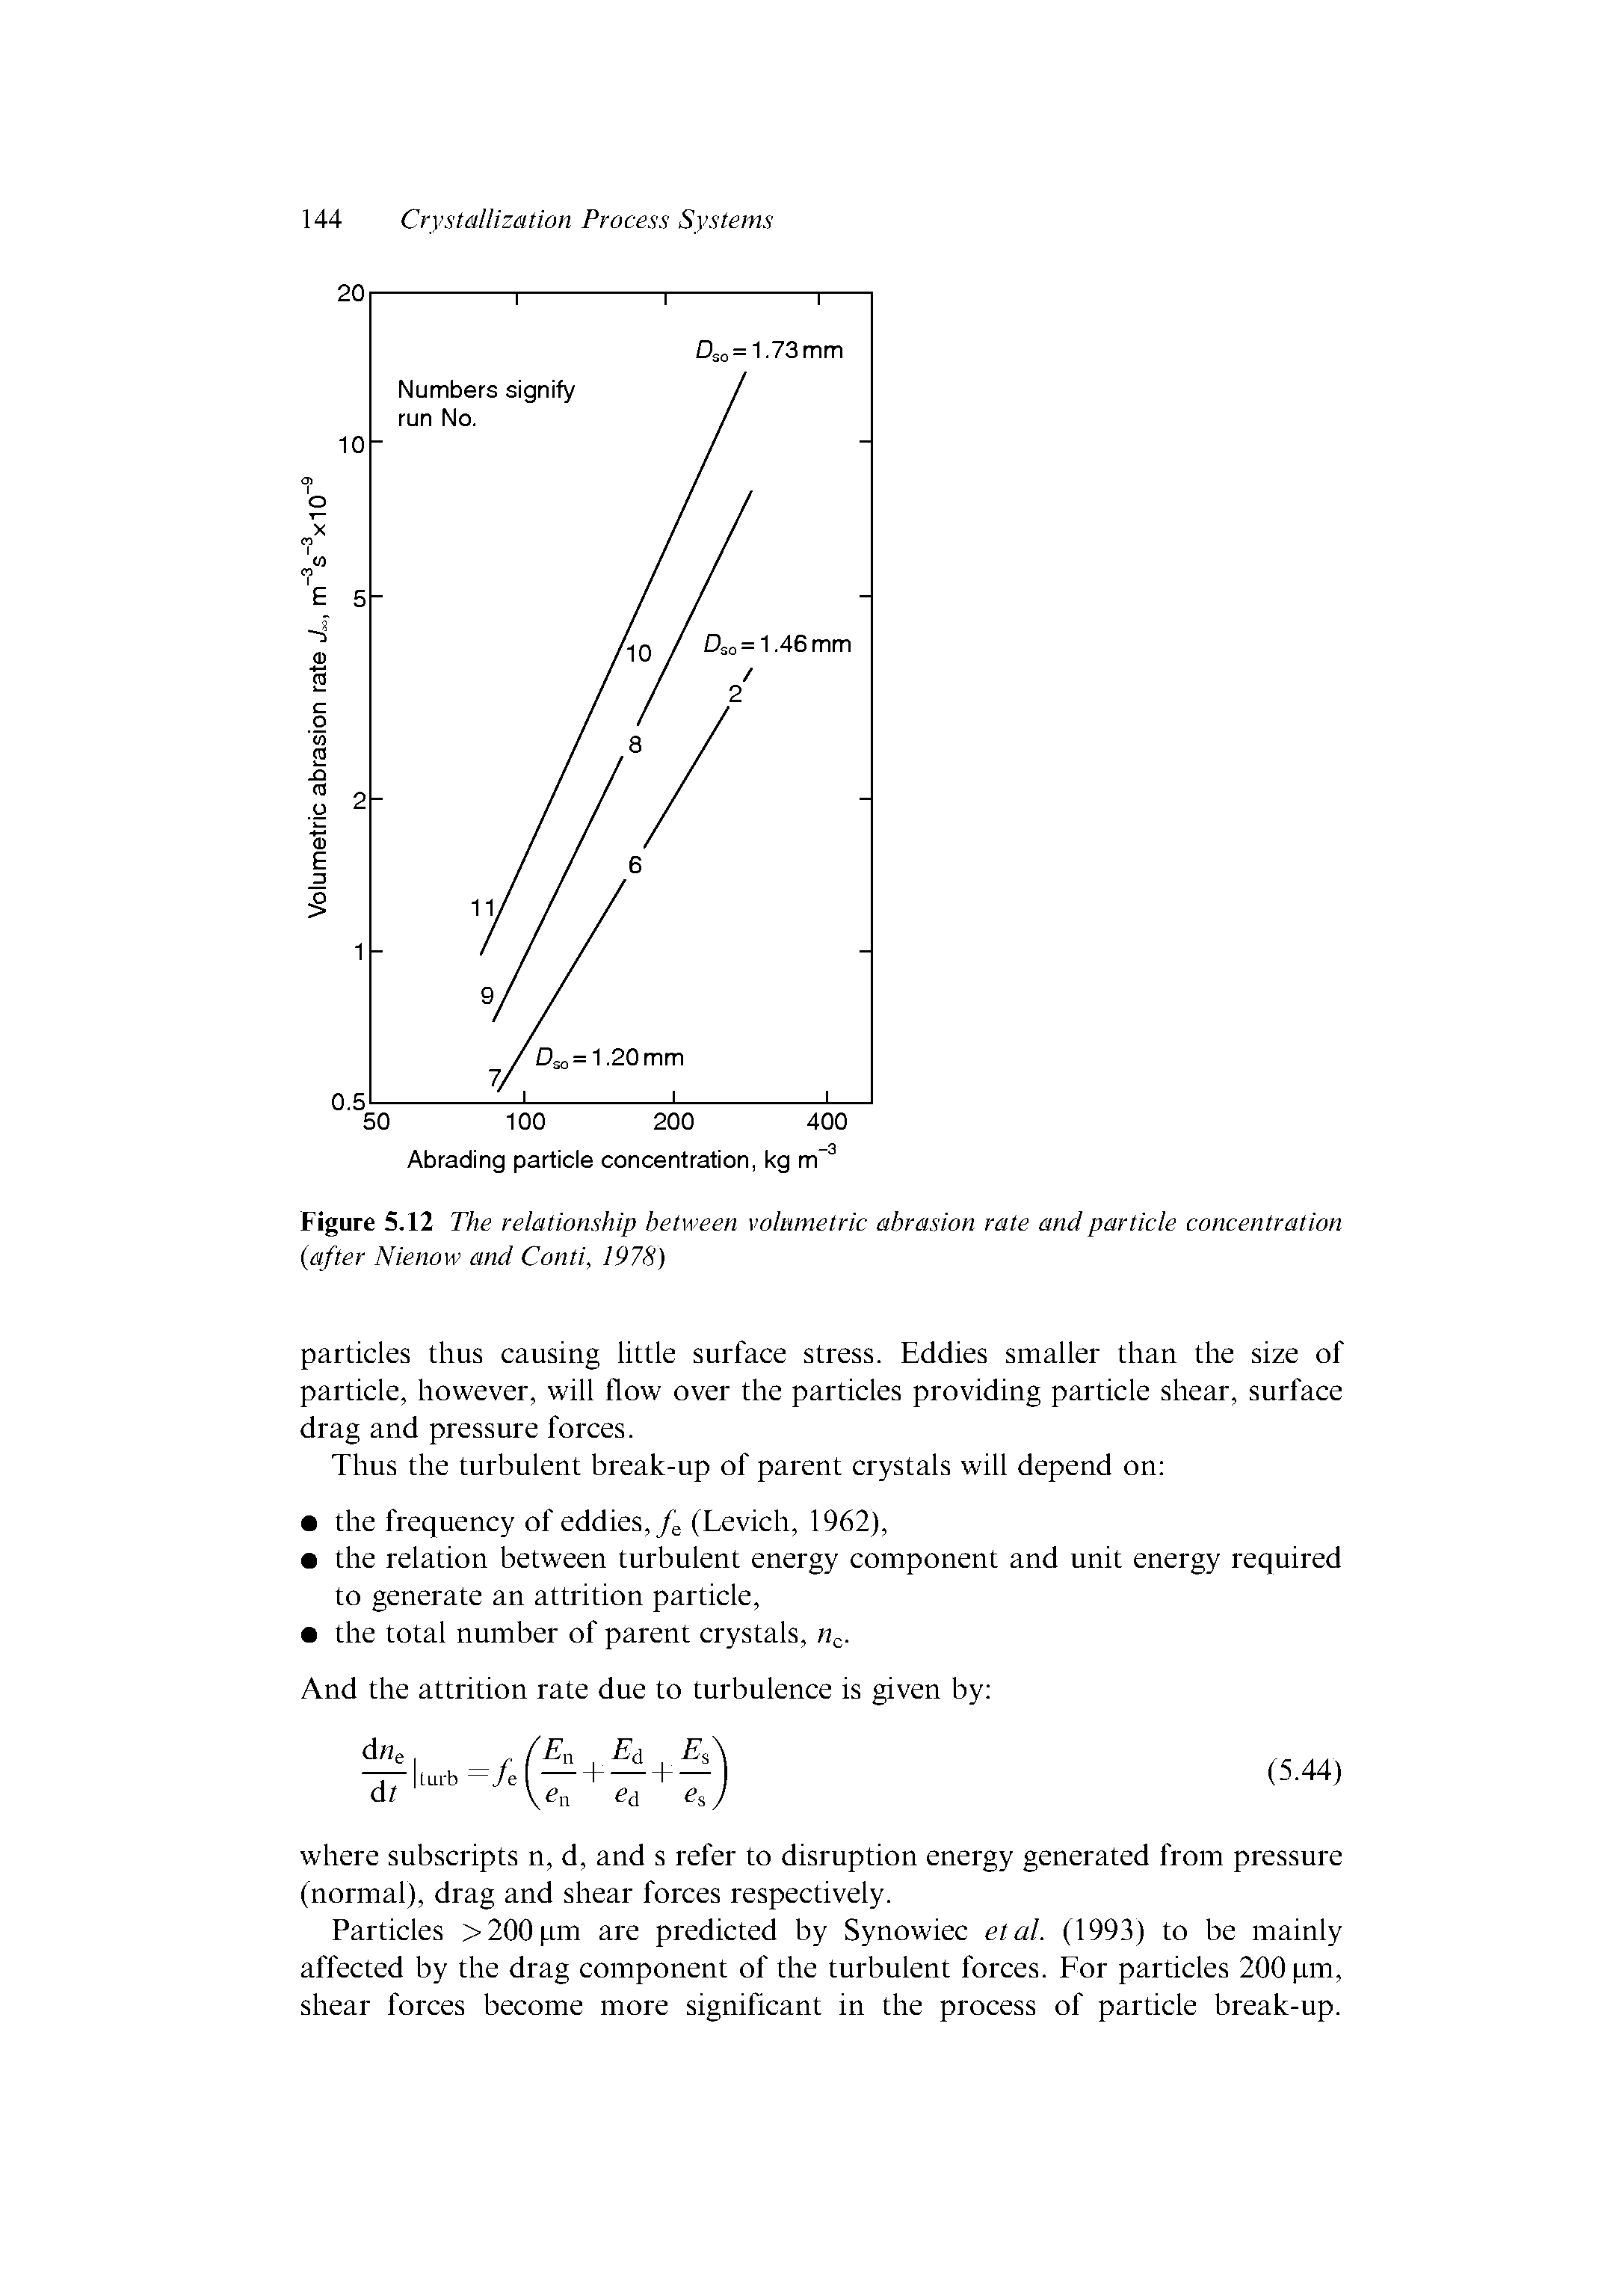 Figure 5.12 The relationship between volumetric abrasion rate and particle concentration after Nienow and Conti, 1978)...